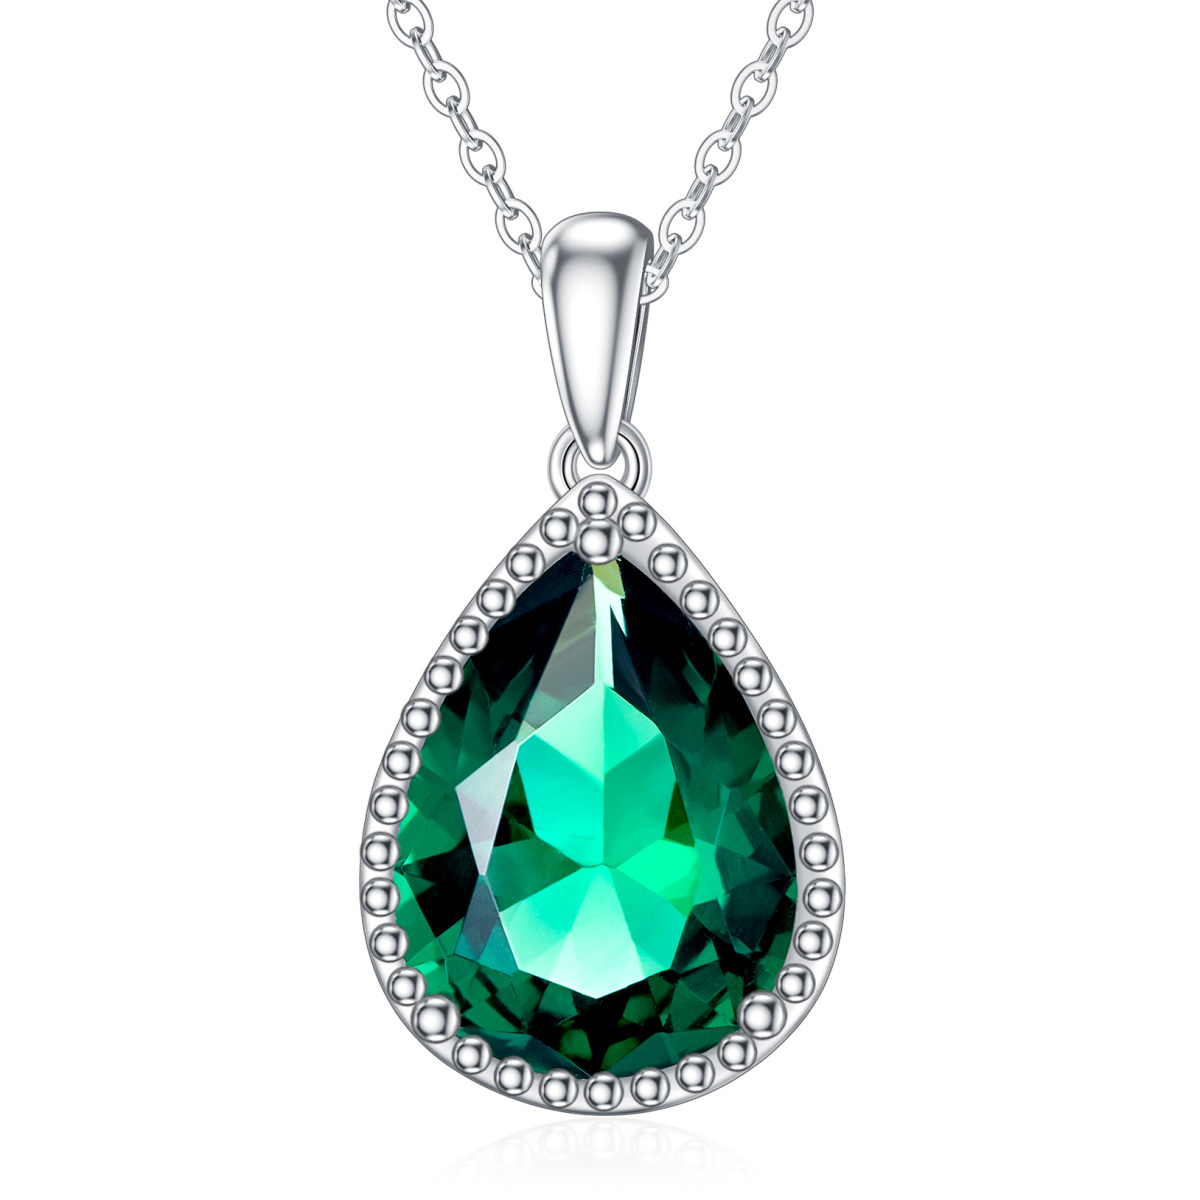 9K White Gold Pear Shaped Emerald Pendant Necklace-1